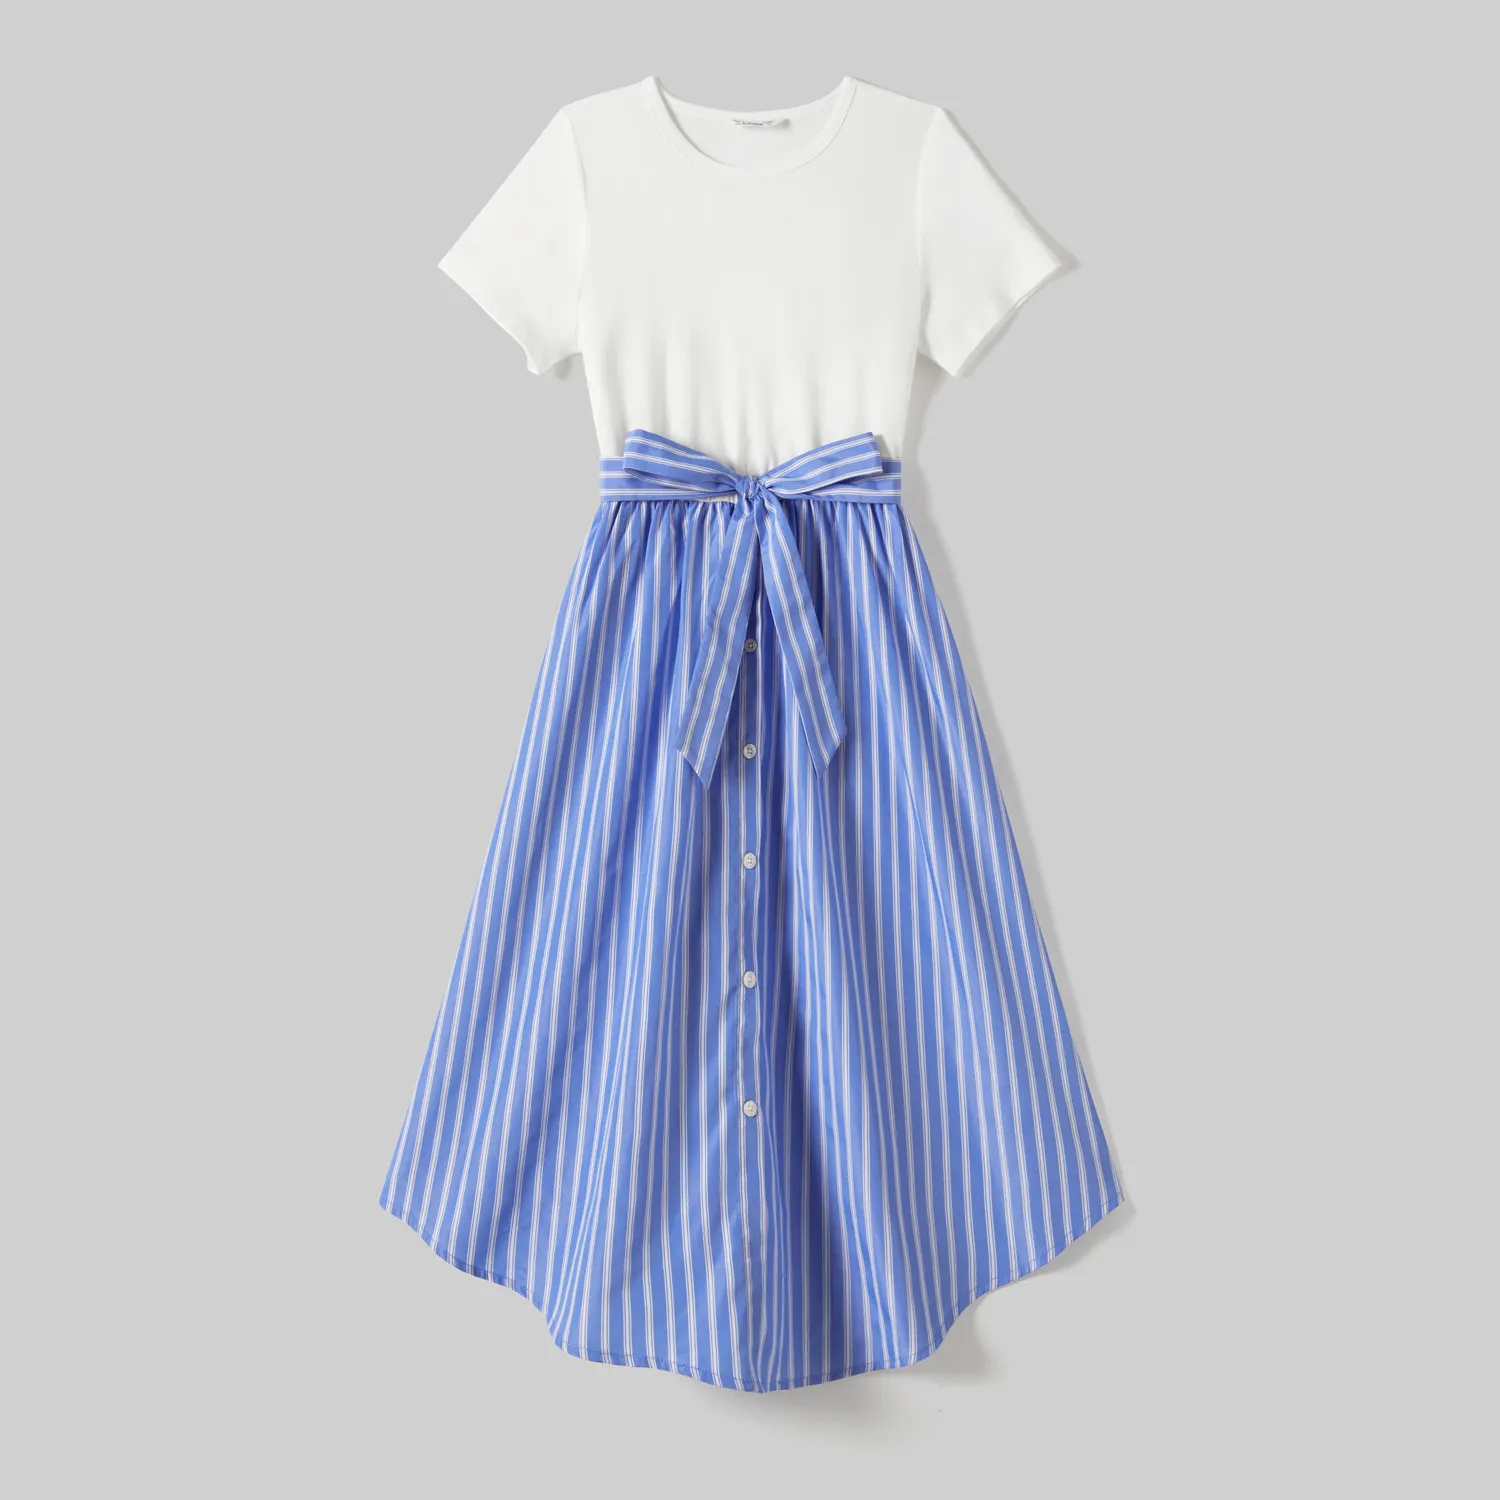 Family Matching Striped Button Belted High Low Hem Dresses And Striped Short Sleeve Tops Sets